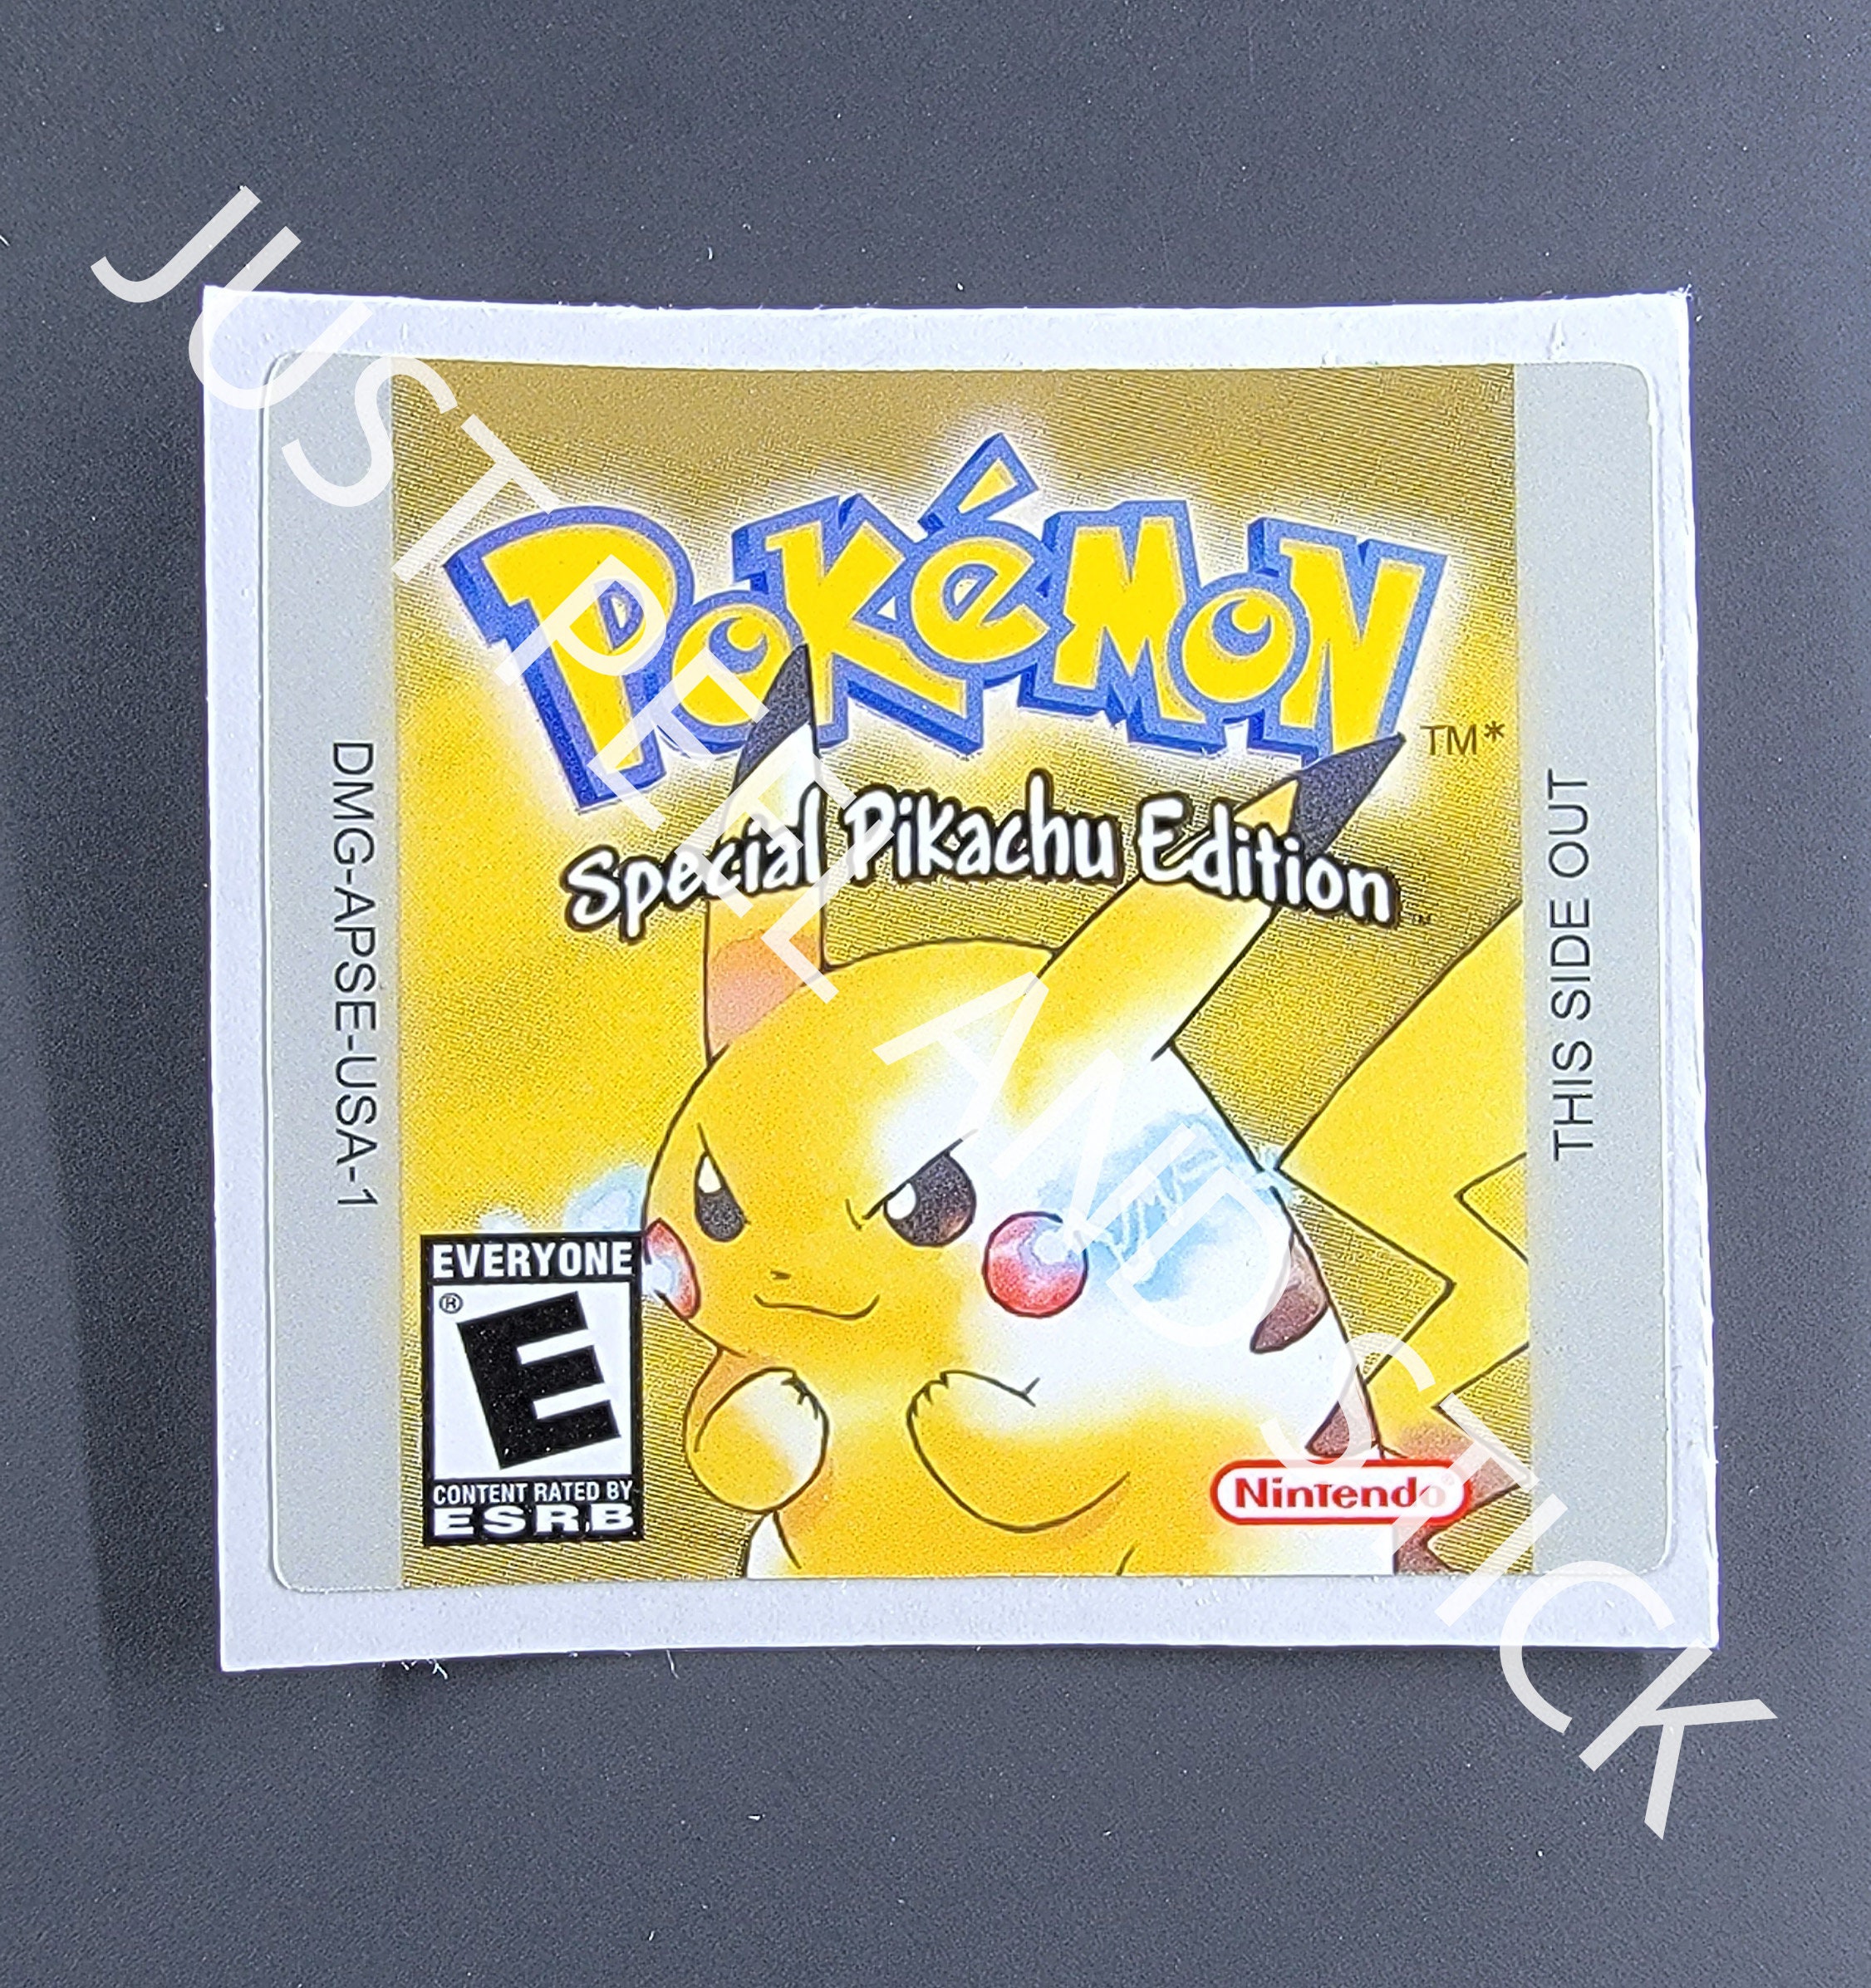 Game Boy Pokemon Red replacement label sticker